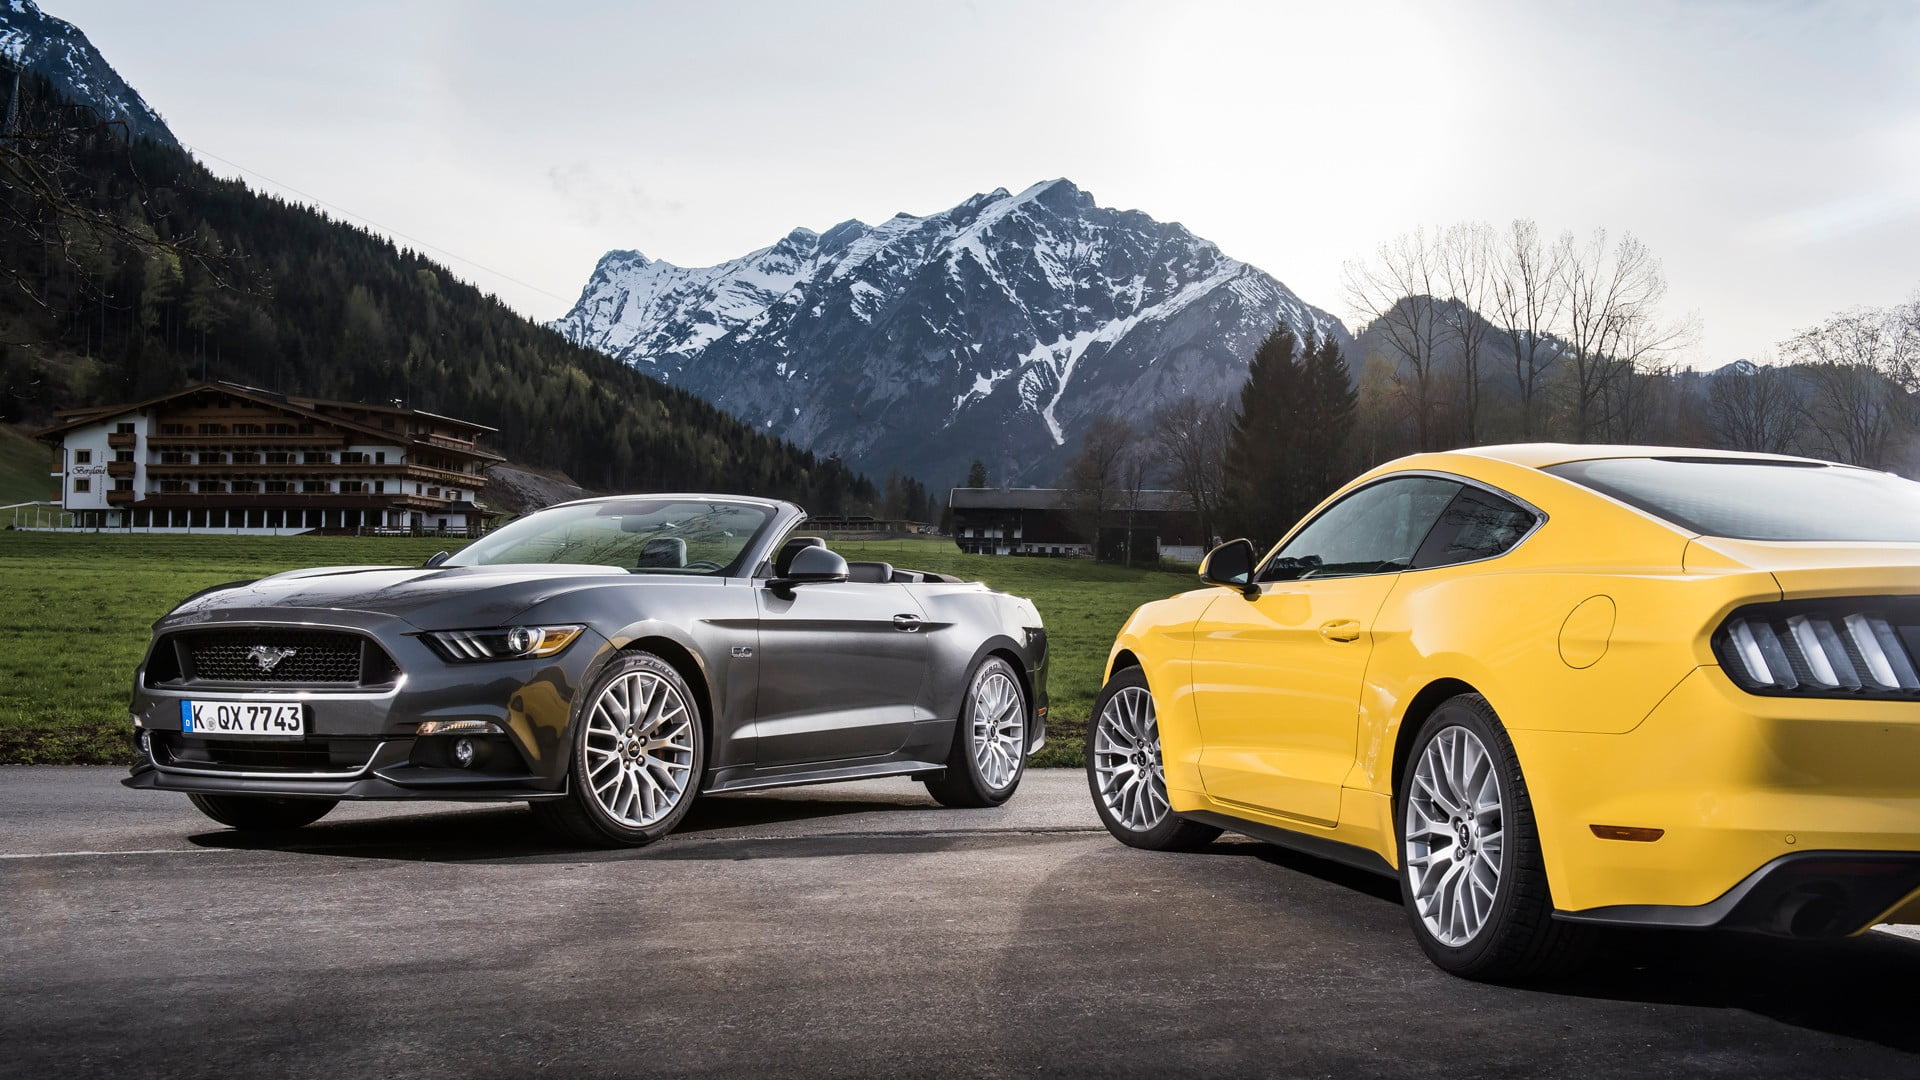 gray Ford Mustang convertible and yellow Ford Mustang muscle cars